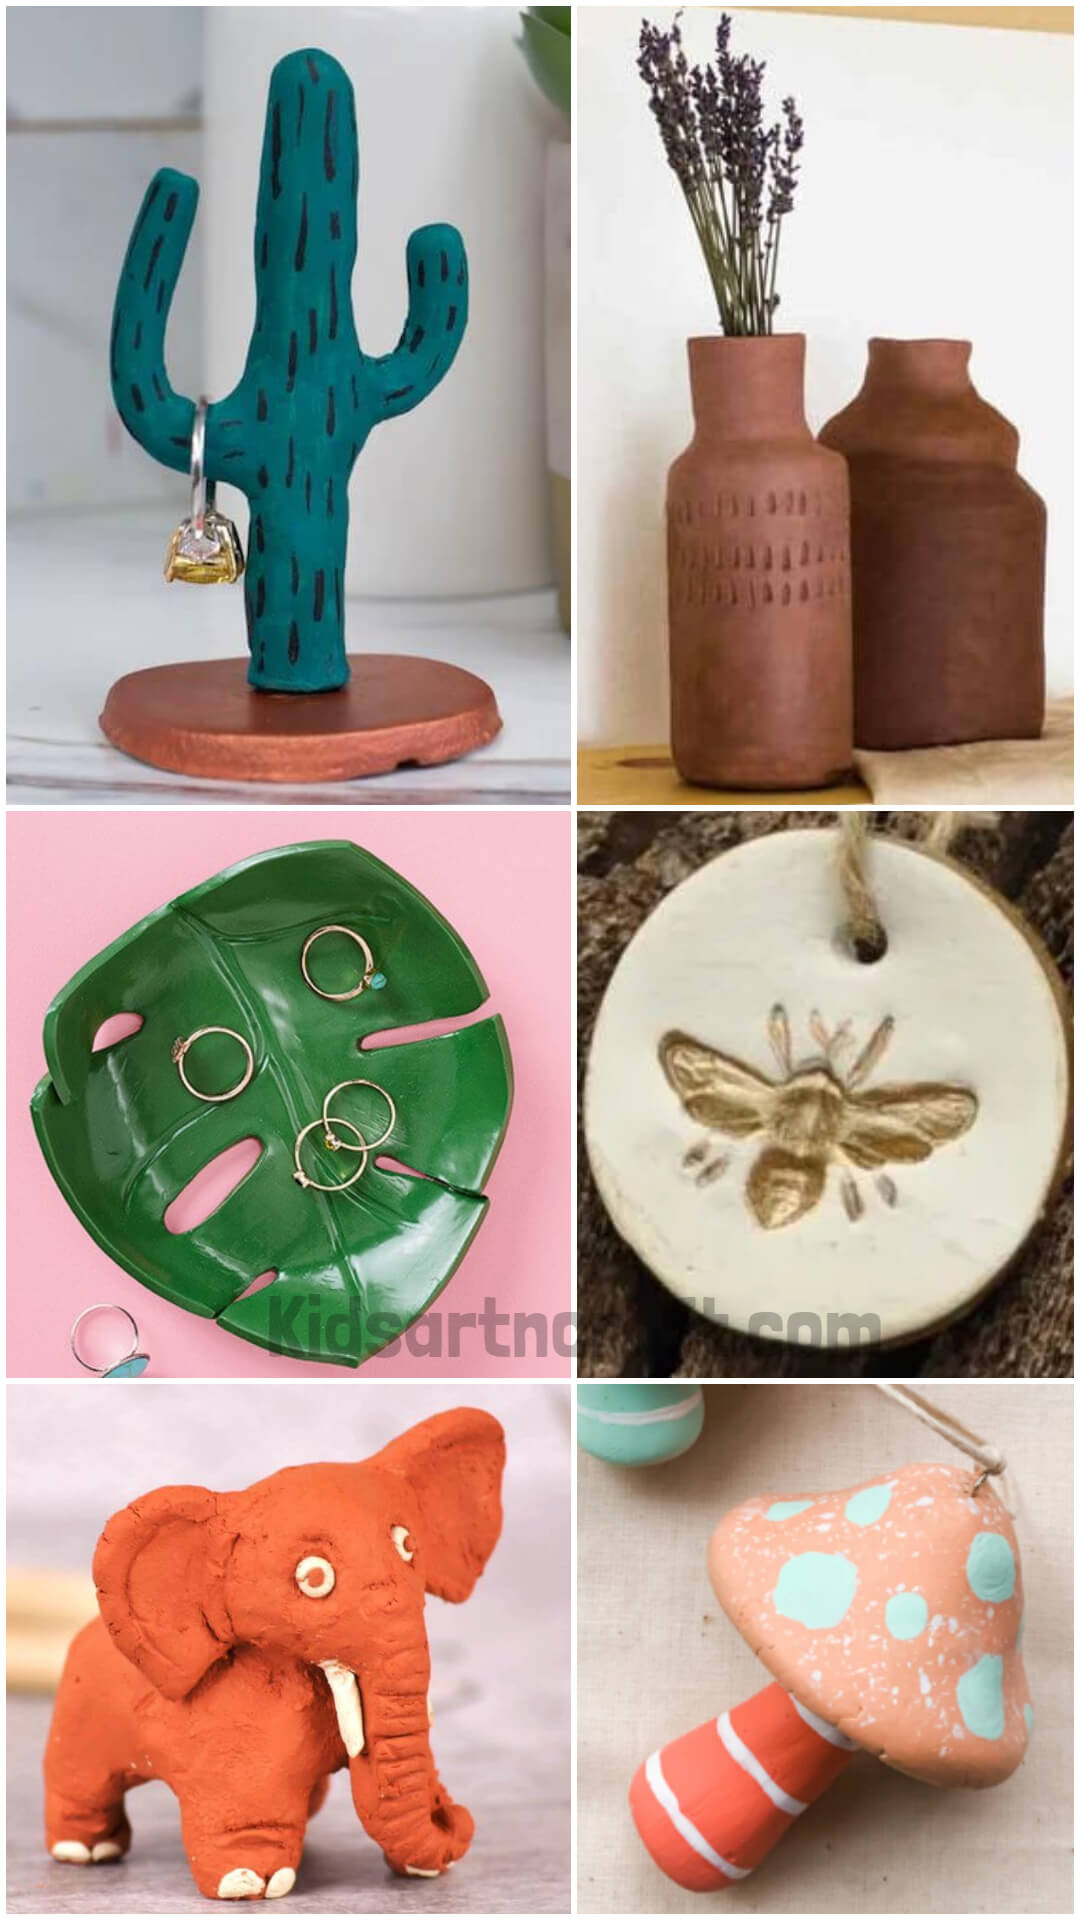 Adorable & Aesthetic Air Dry Clay Crafting Ideas To Make